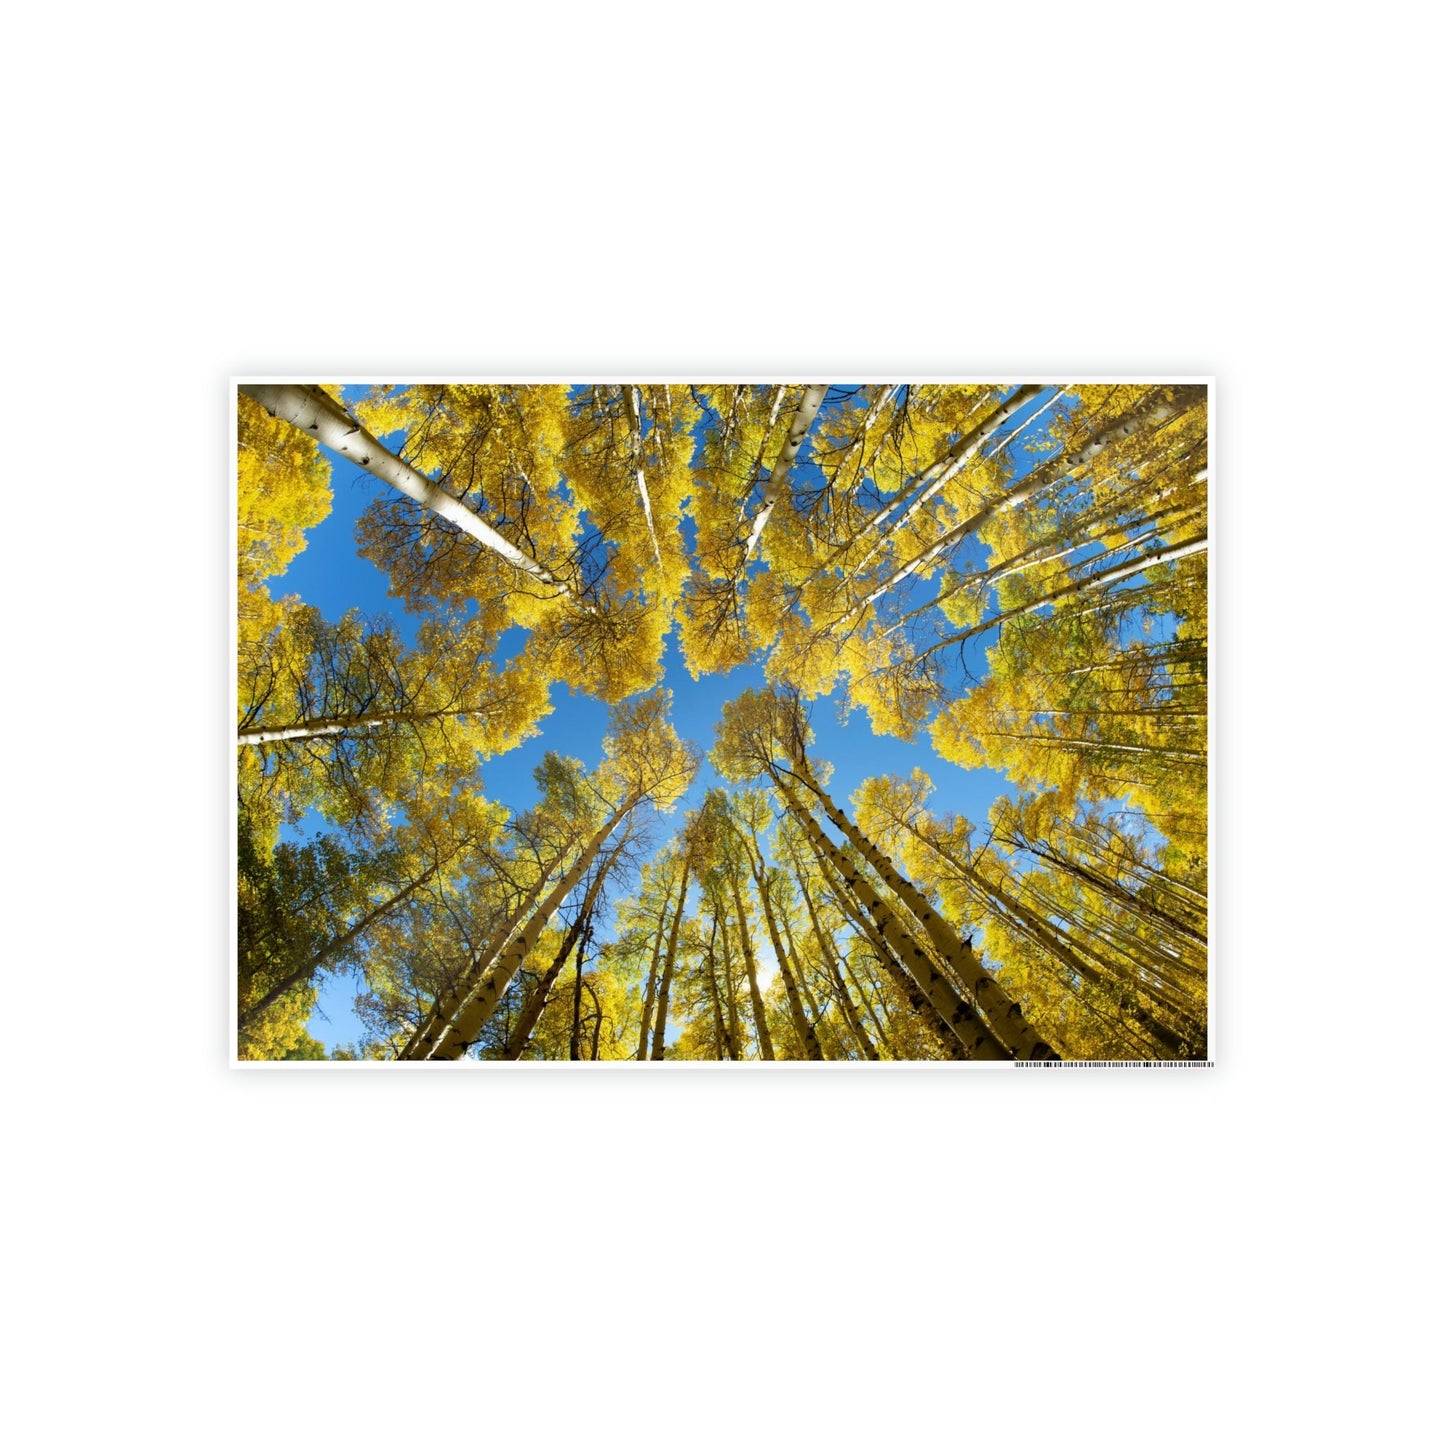 The Beauty of Nature: Rustic Framed Canvas Print of a Birch Tree Grove